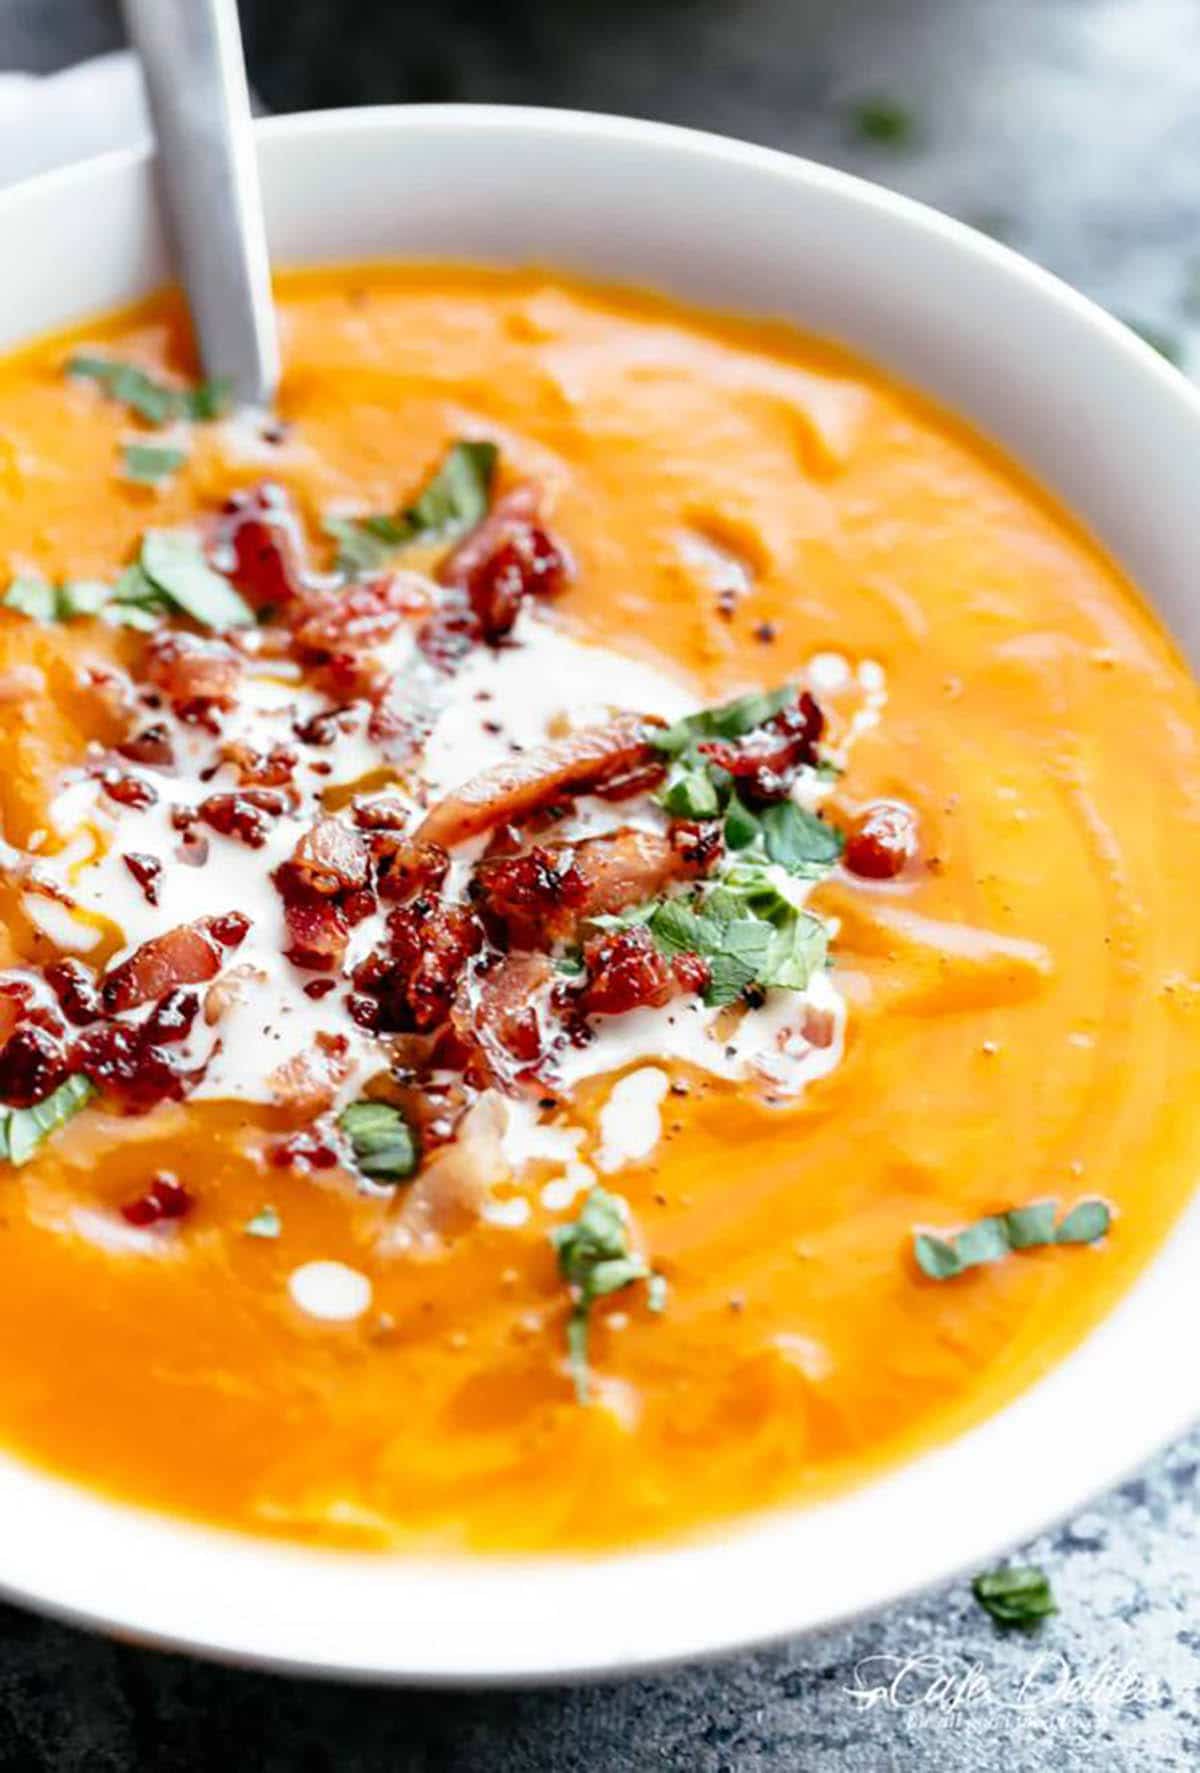 Thick & Creamy Pumpkin Soup served with a swirl of cream, crispy bacon pieces and on the side cheesy garlic bread.